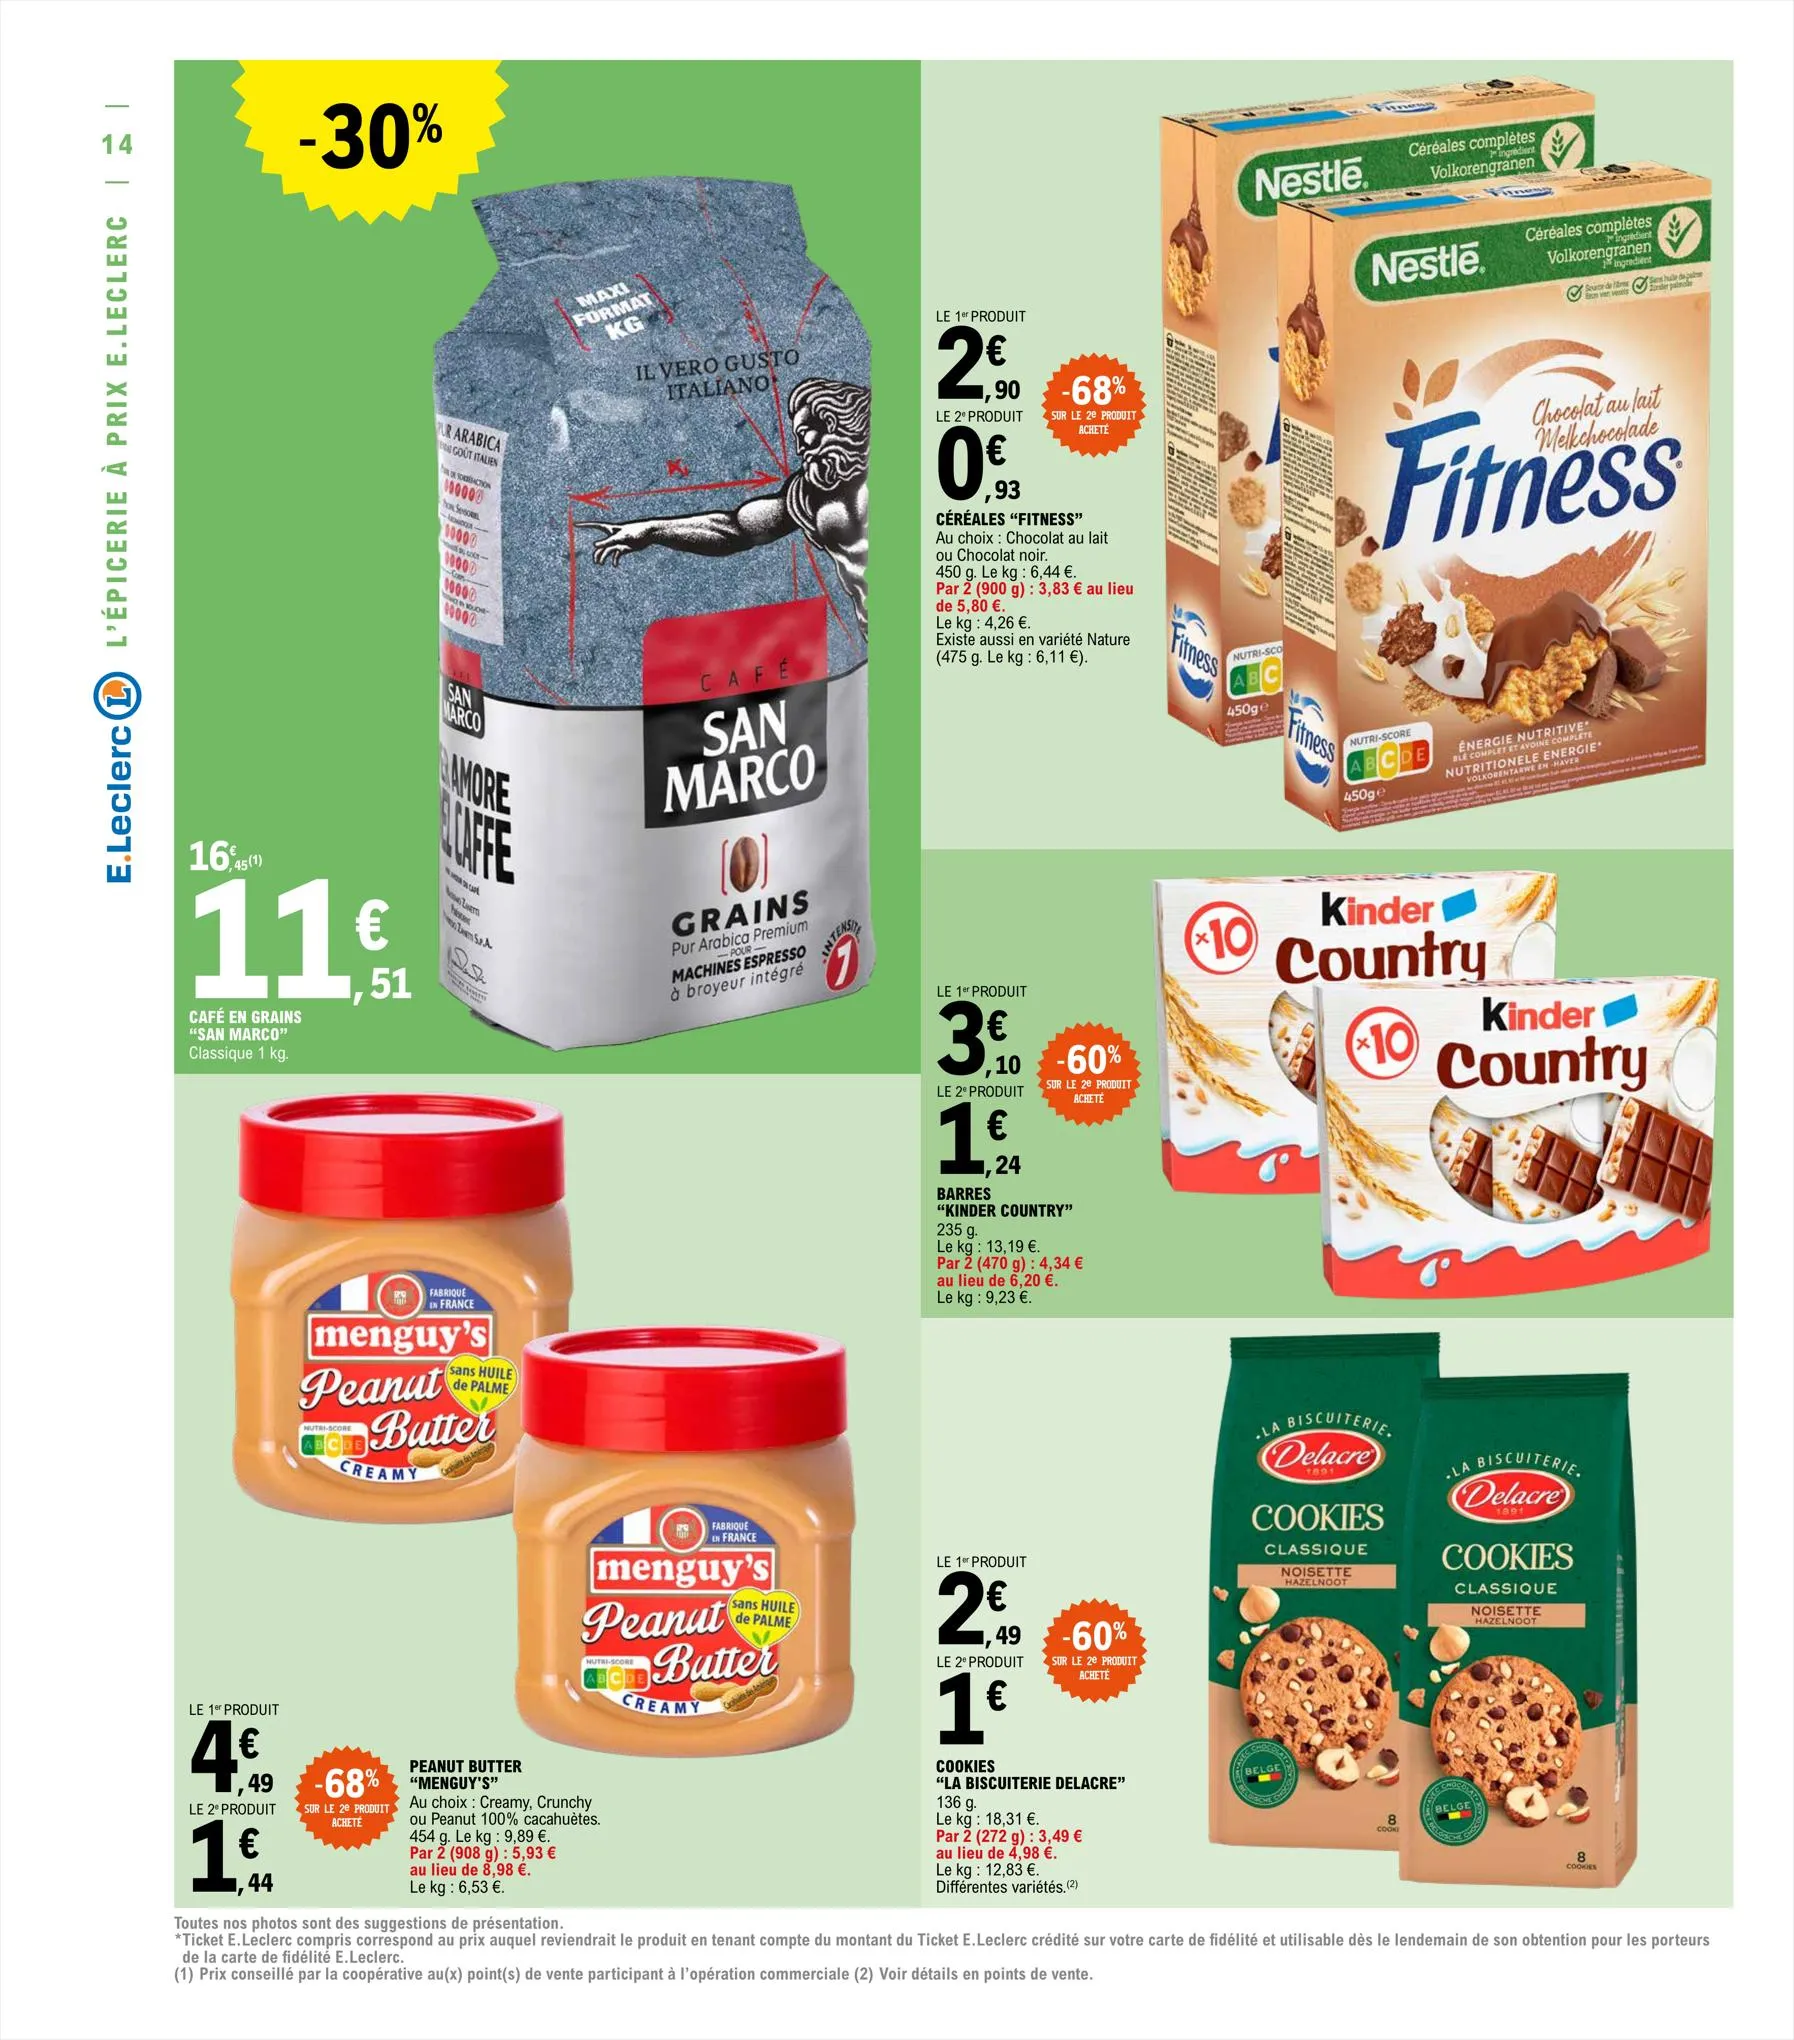 Catalogue Relance Alimentaire 10 - Mixte, page 00014